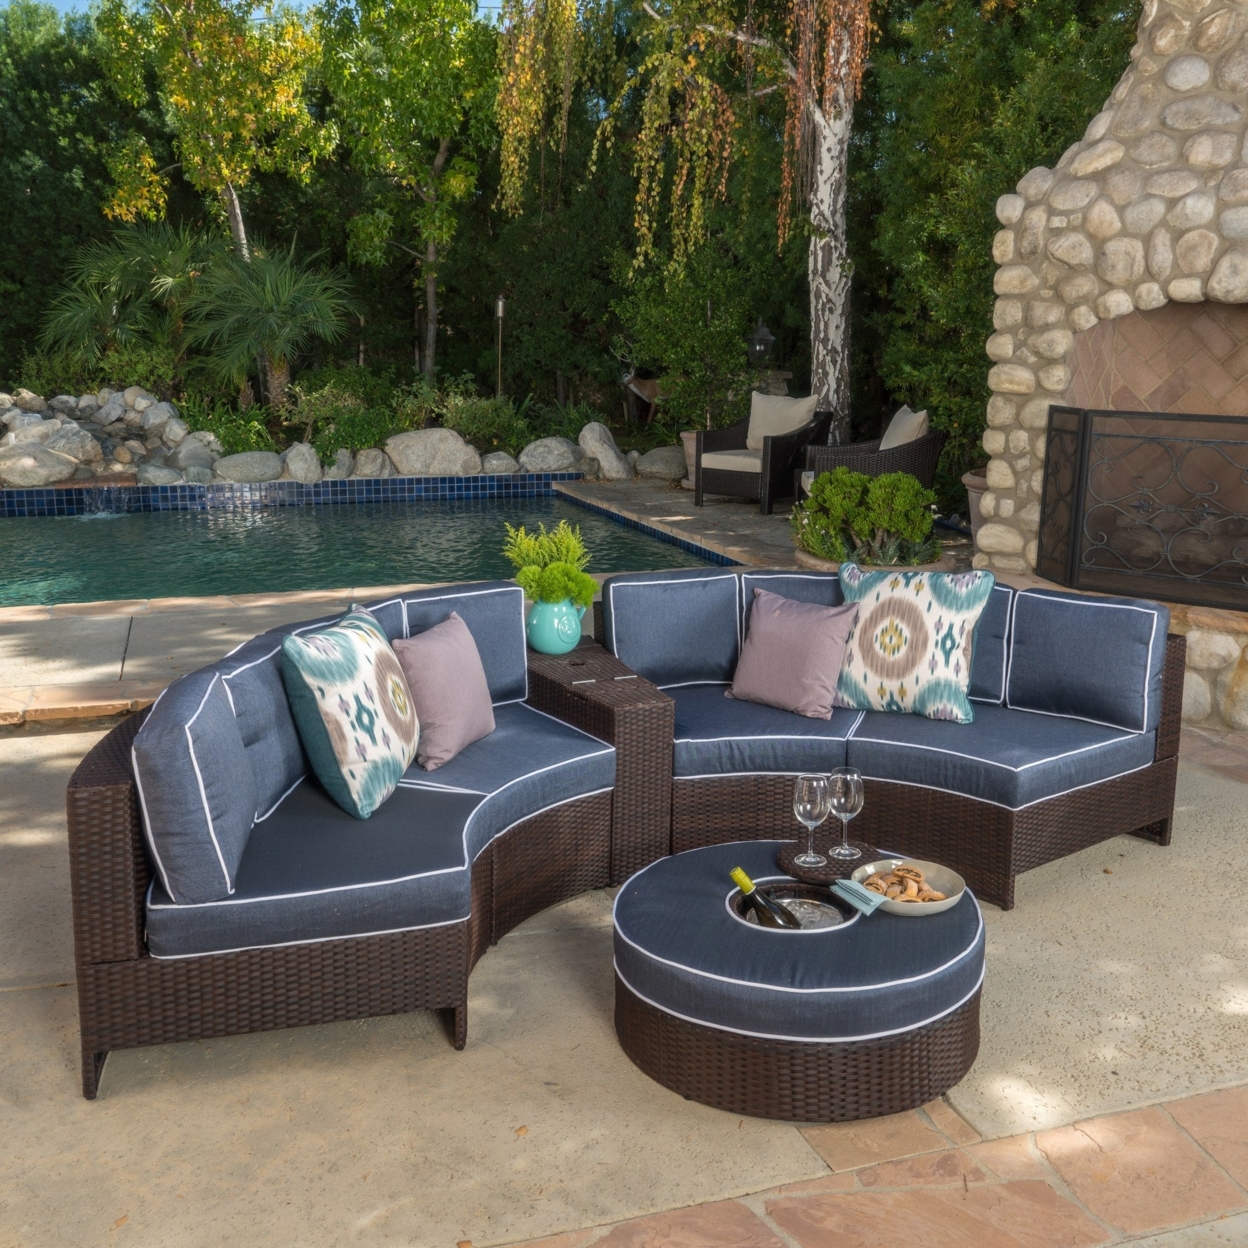 Riviera 6pc Outdoor Sectional Sofa Set With Storage Trunk & Ice Bucket - Beige